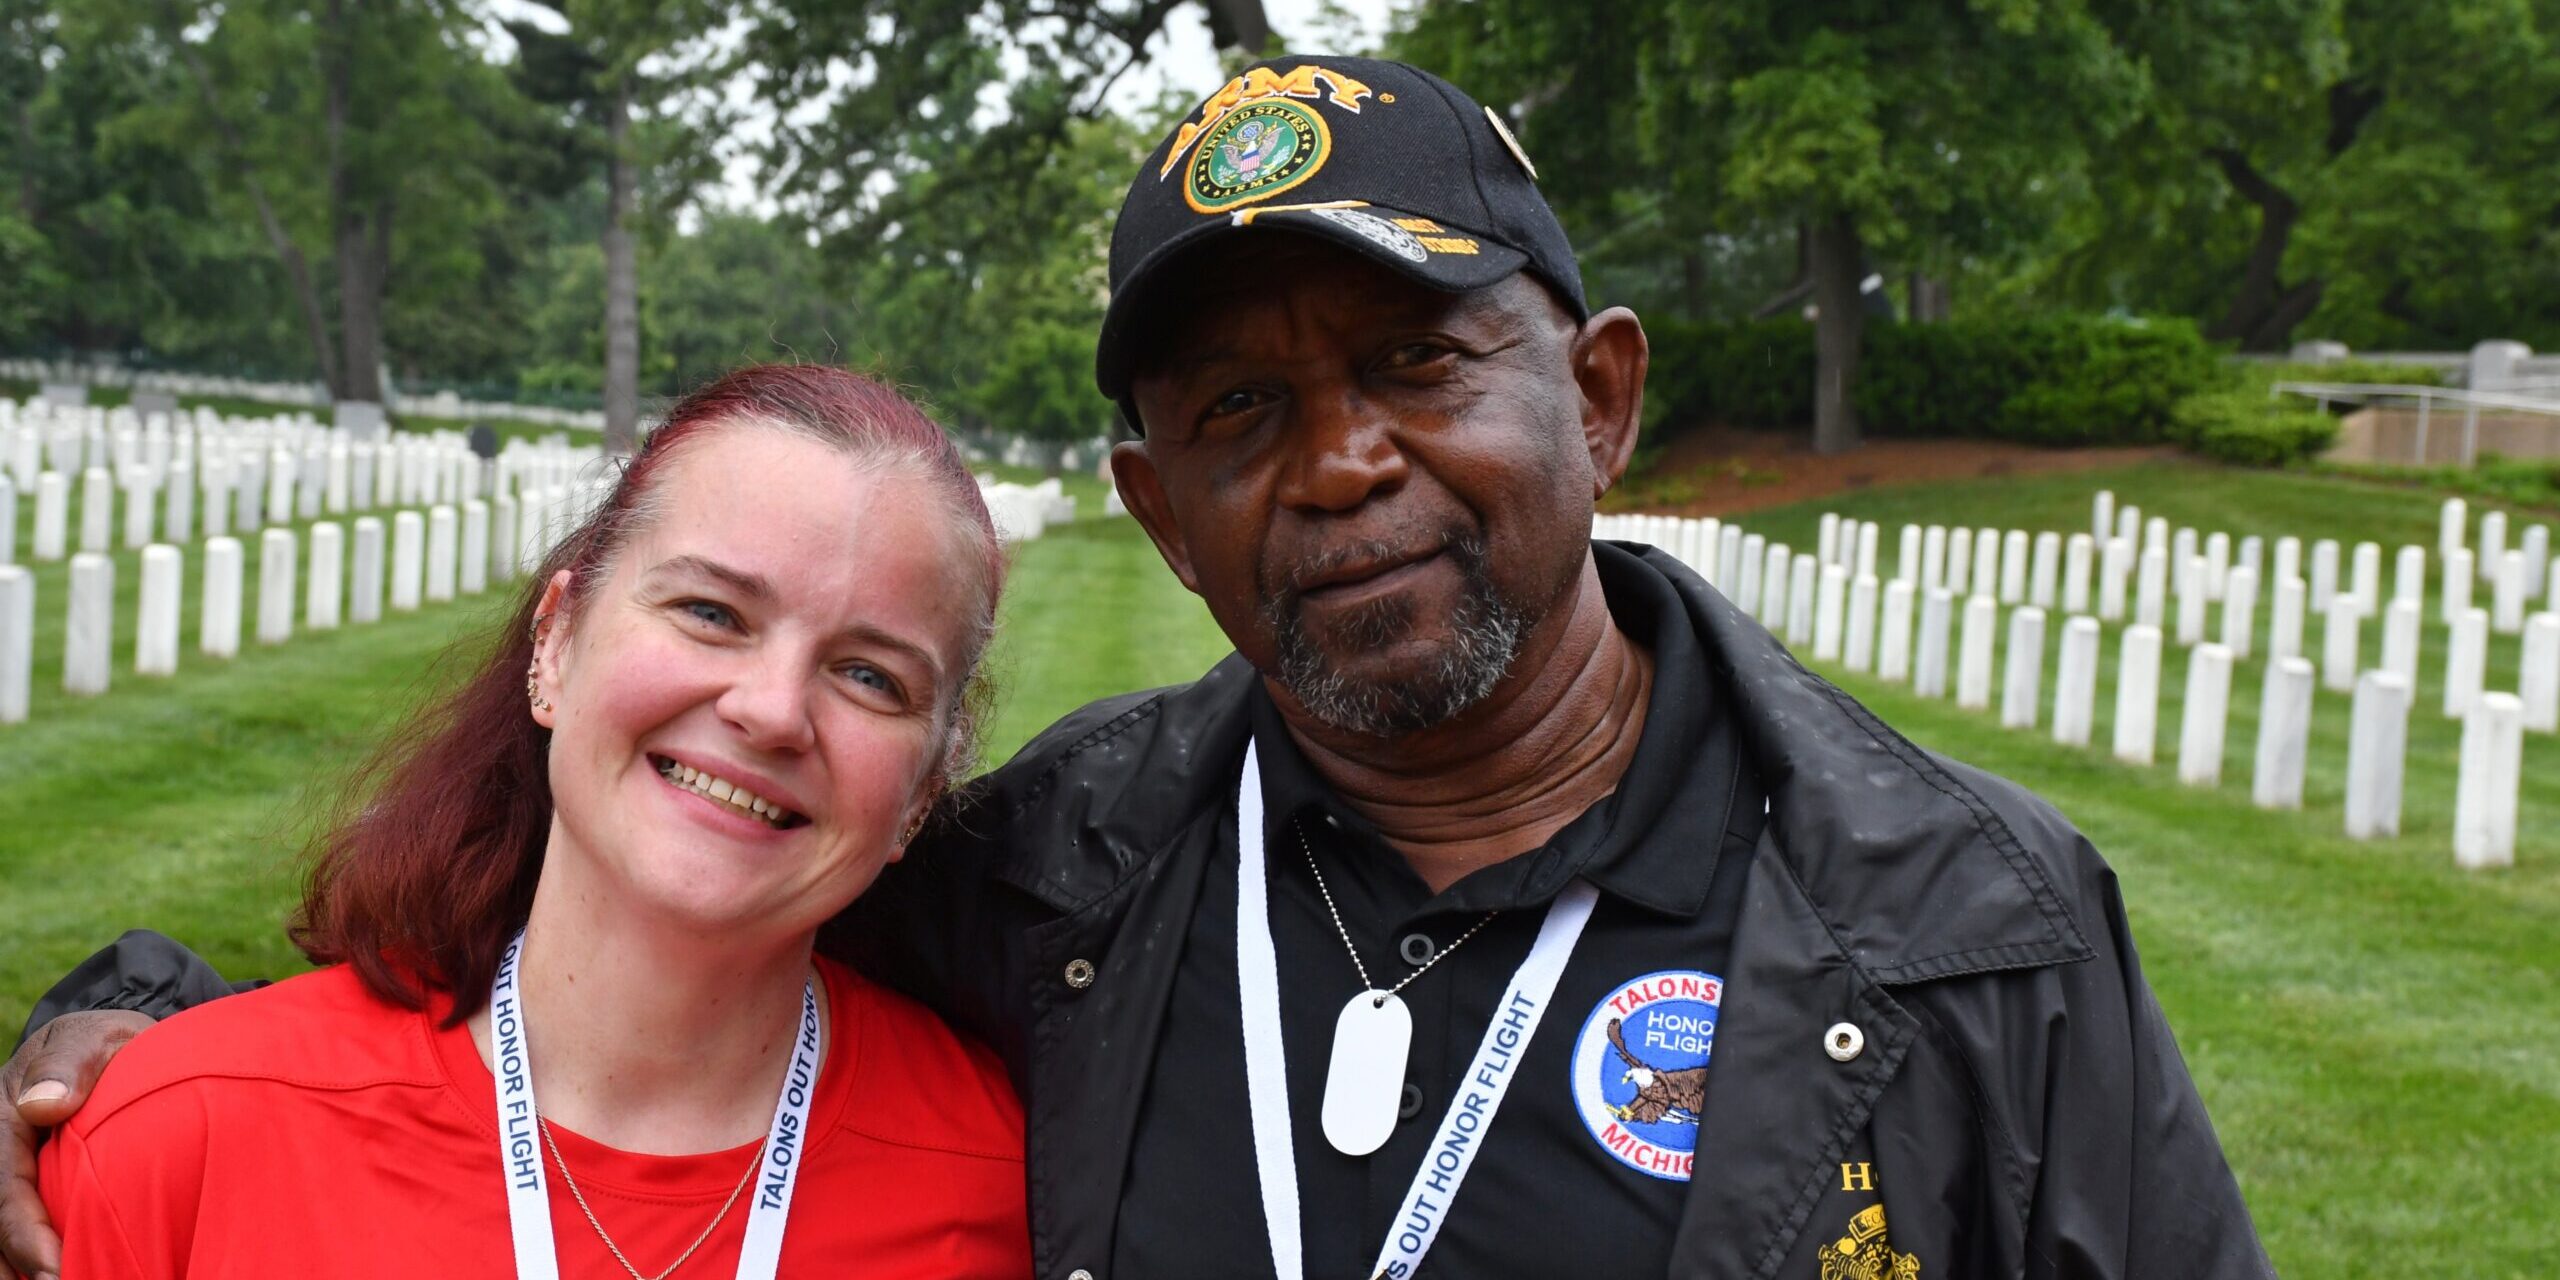 A woman in a red shirt smiles for a photo with a U.S. Army veteran.